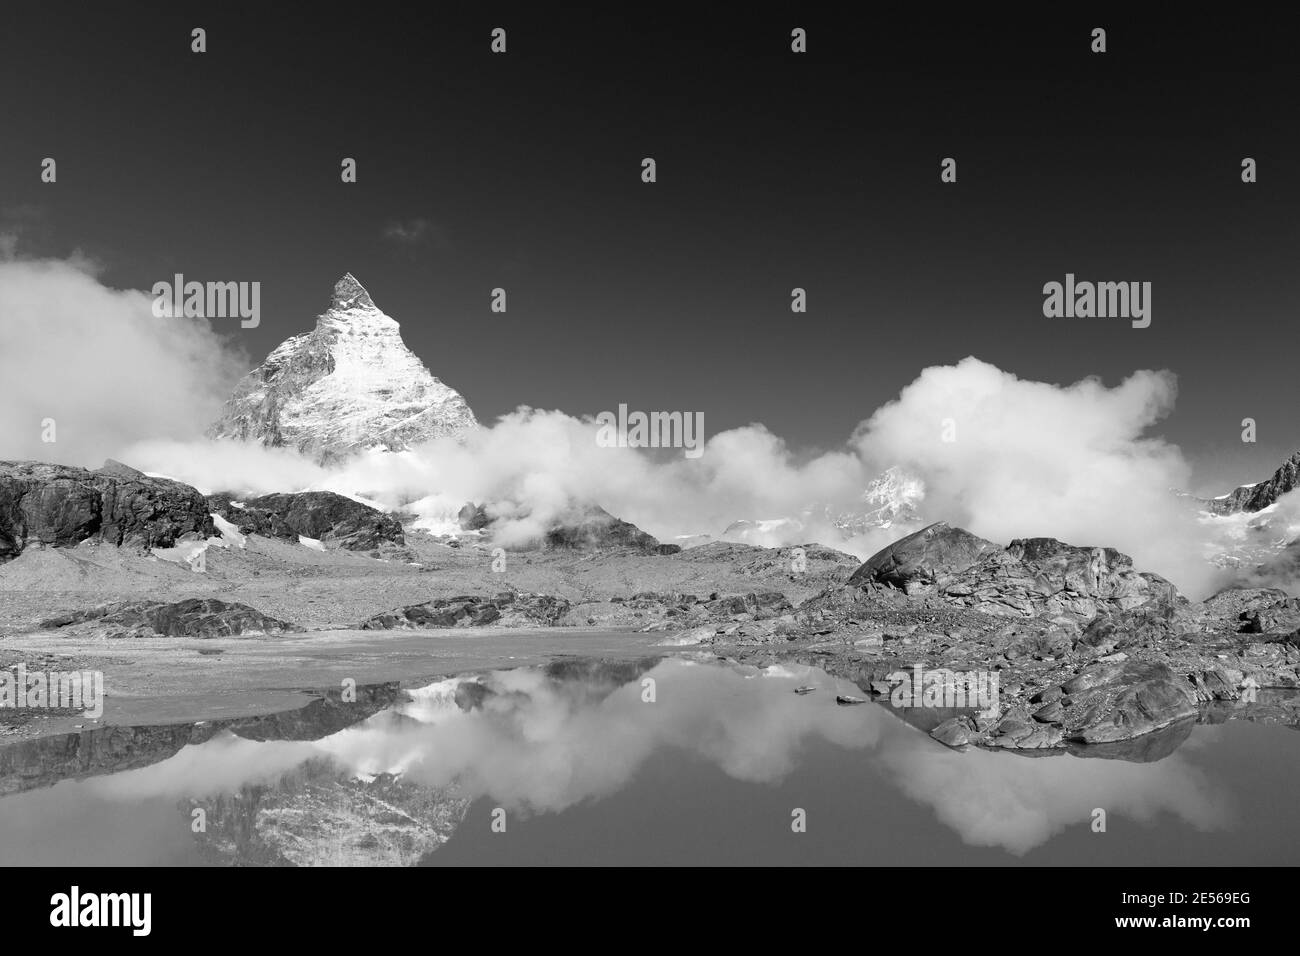 Matterhorn Black and White Stock Photos & Images - Alamy